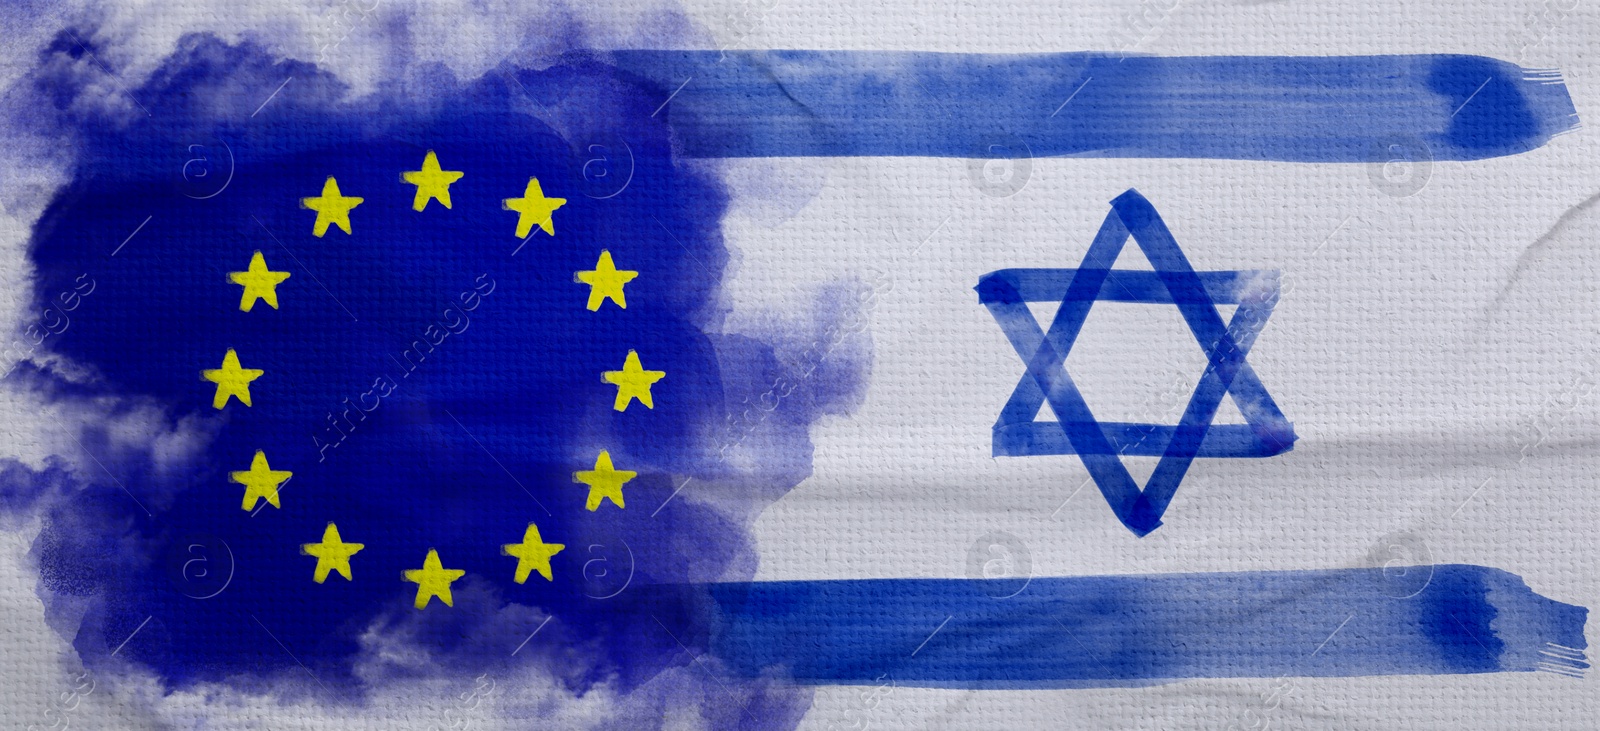 Image of International relations. Flags of Israel and European Union on textured surface, banner design